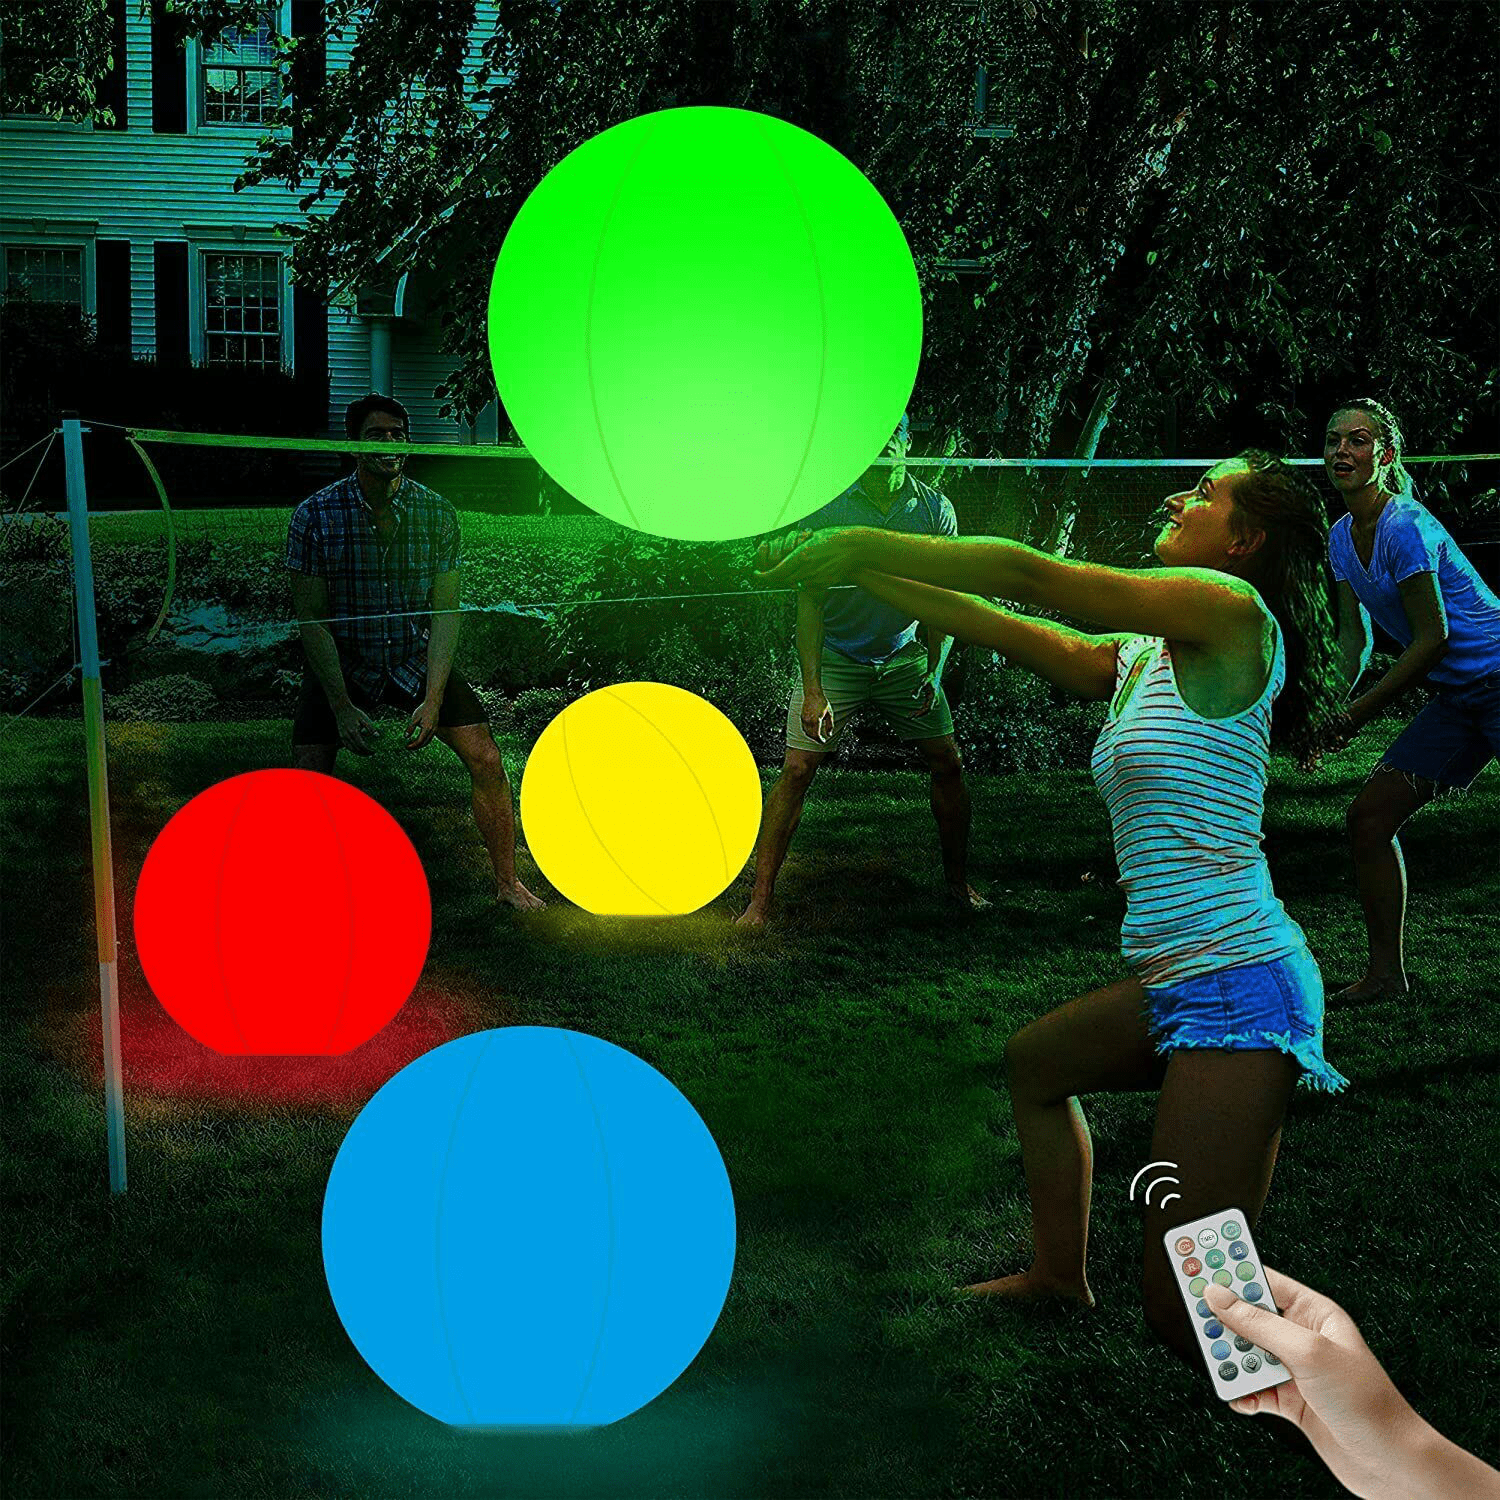 1 PCS Beach Ball Glow 16 Pool Toys 13 Colors Inflatable LED Light Up Beach Ball with Remote Glow in The Dark Home Indoor Outdoor Games Patio Garden Swimming Party Decorations